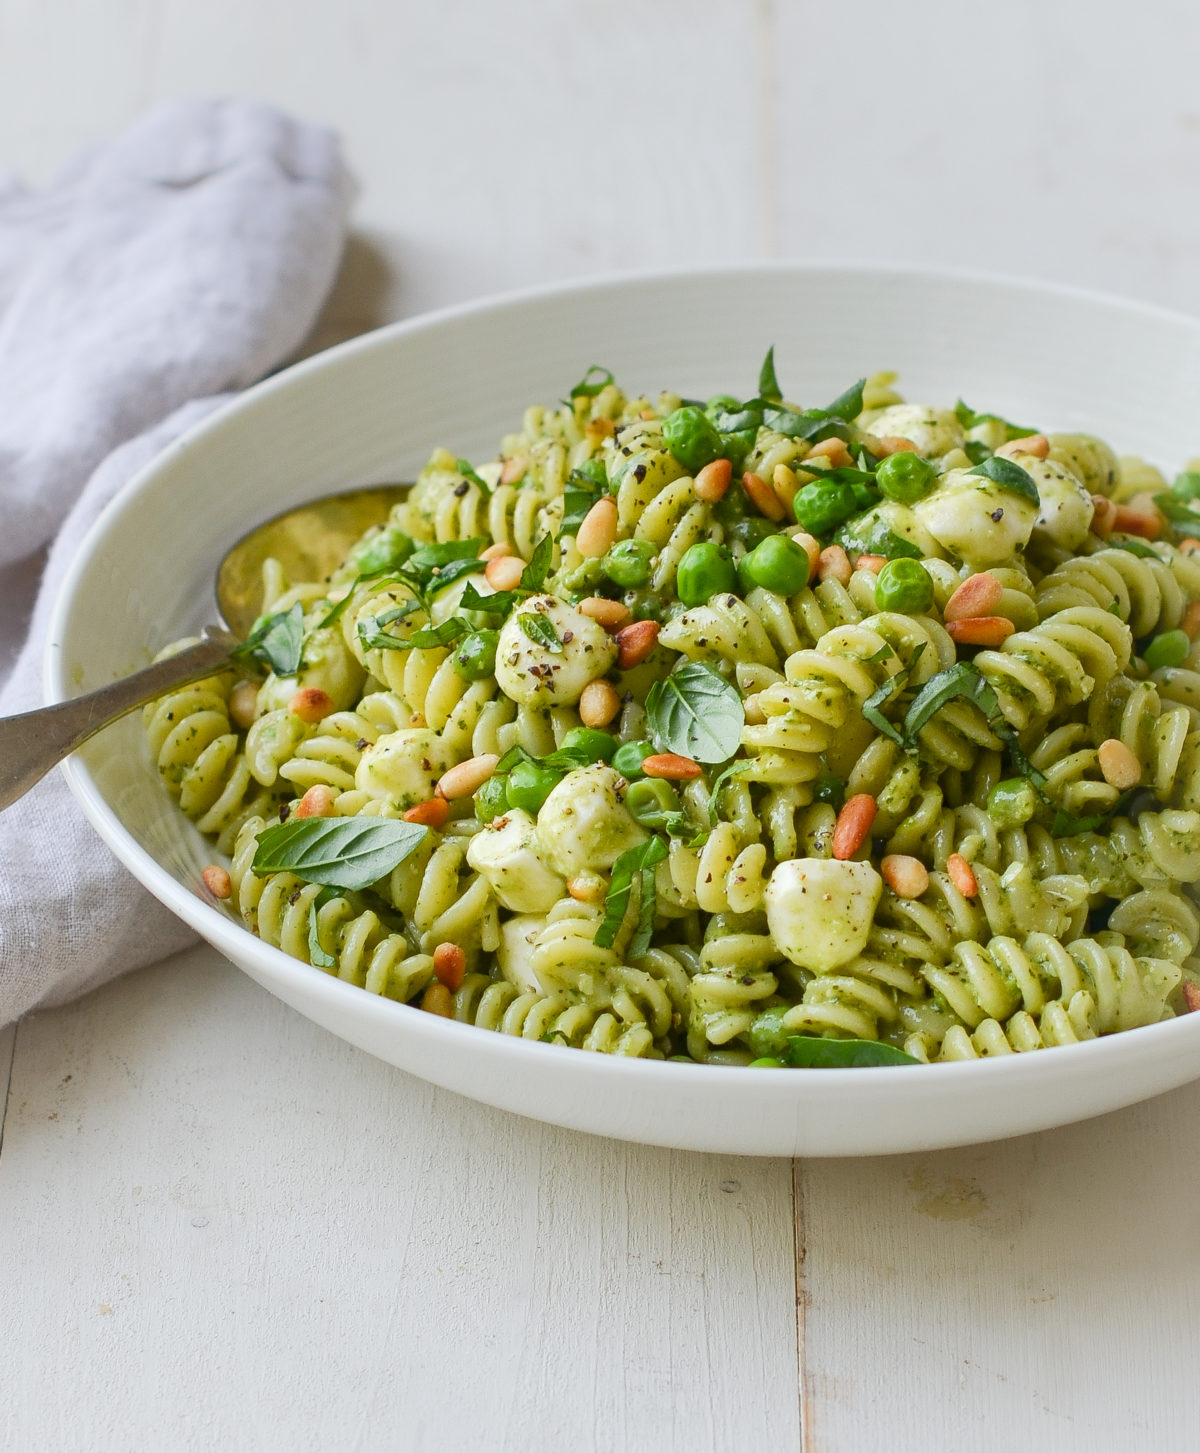 What pasta shape is best for pesto